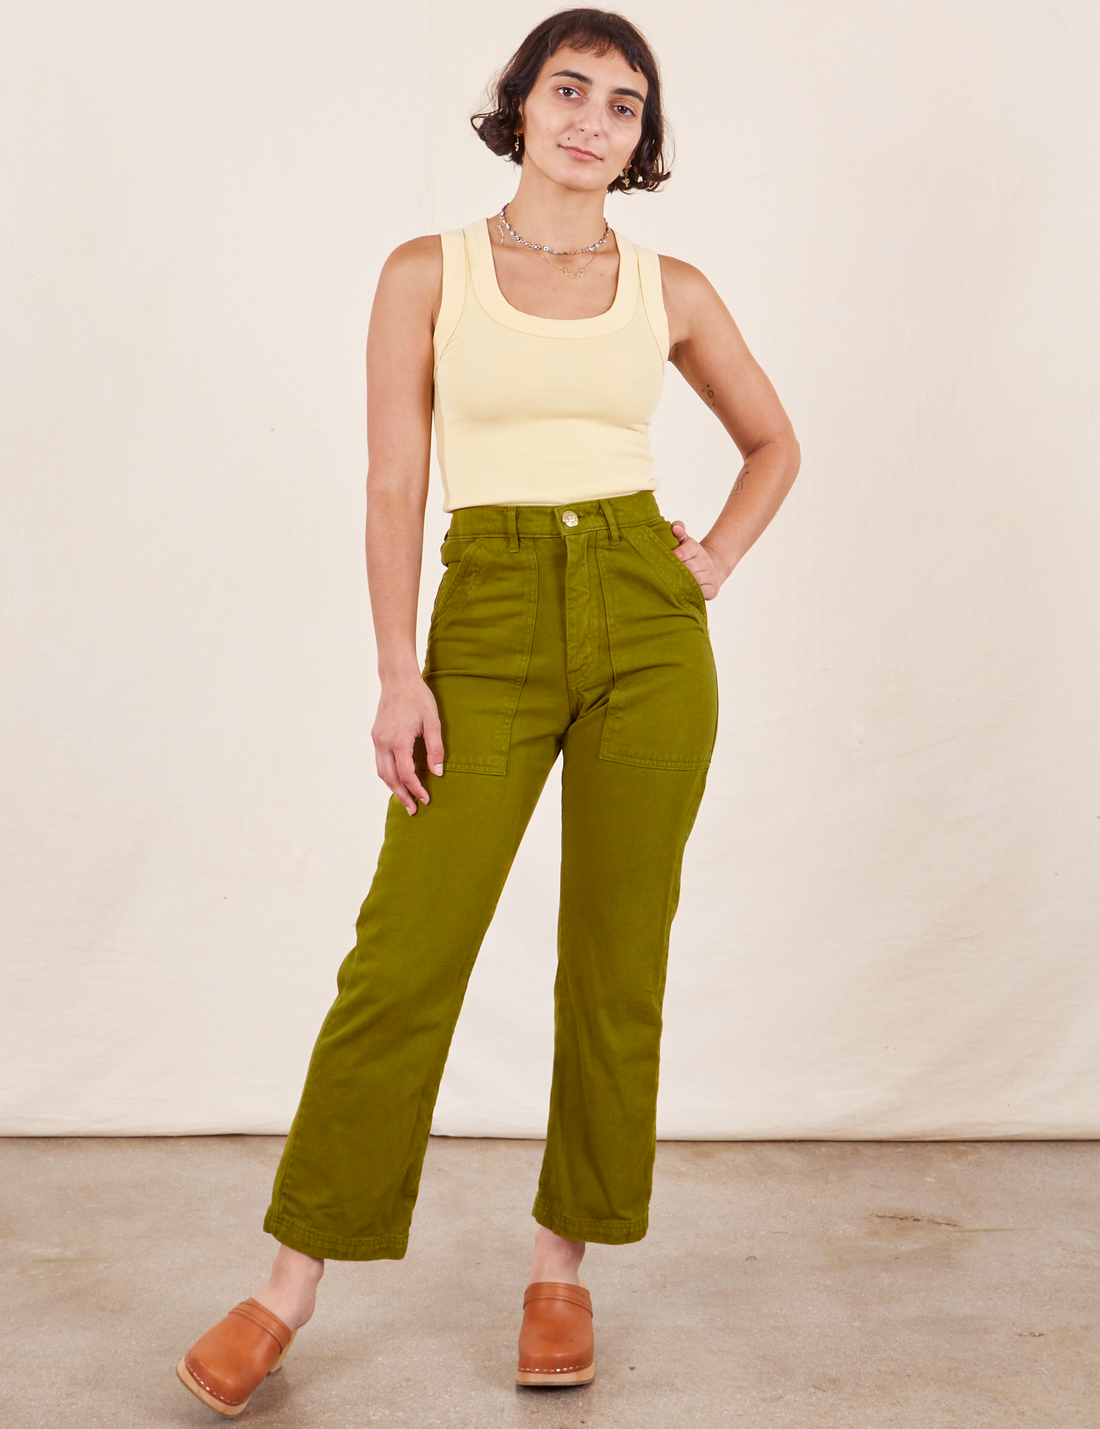 Soraya is 5'2" and wearing Petite XXS Work Pants in Olive Green paired with butter yellow Tank Top